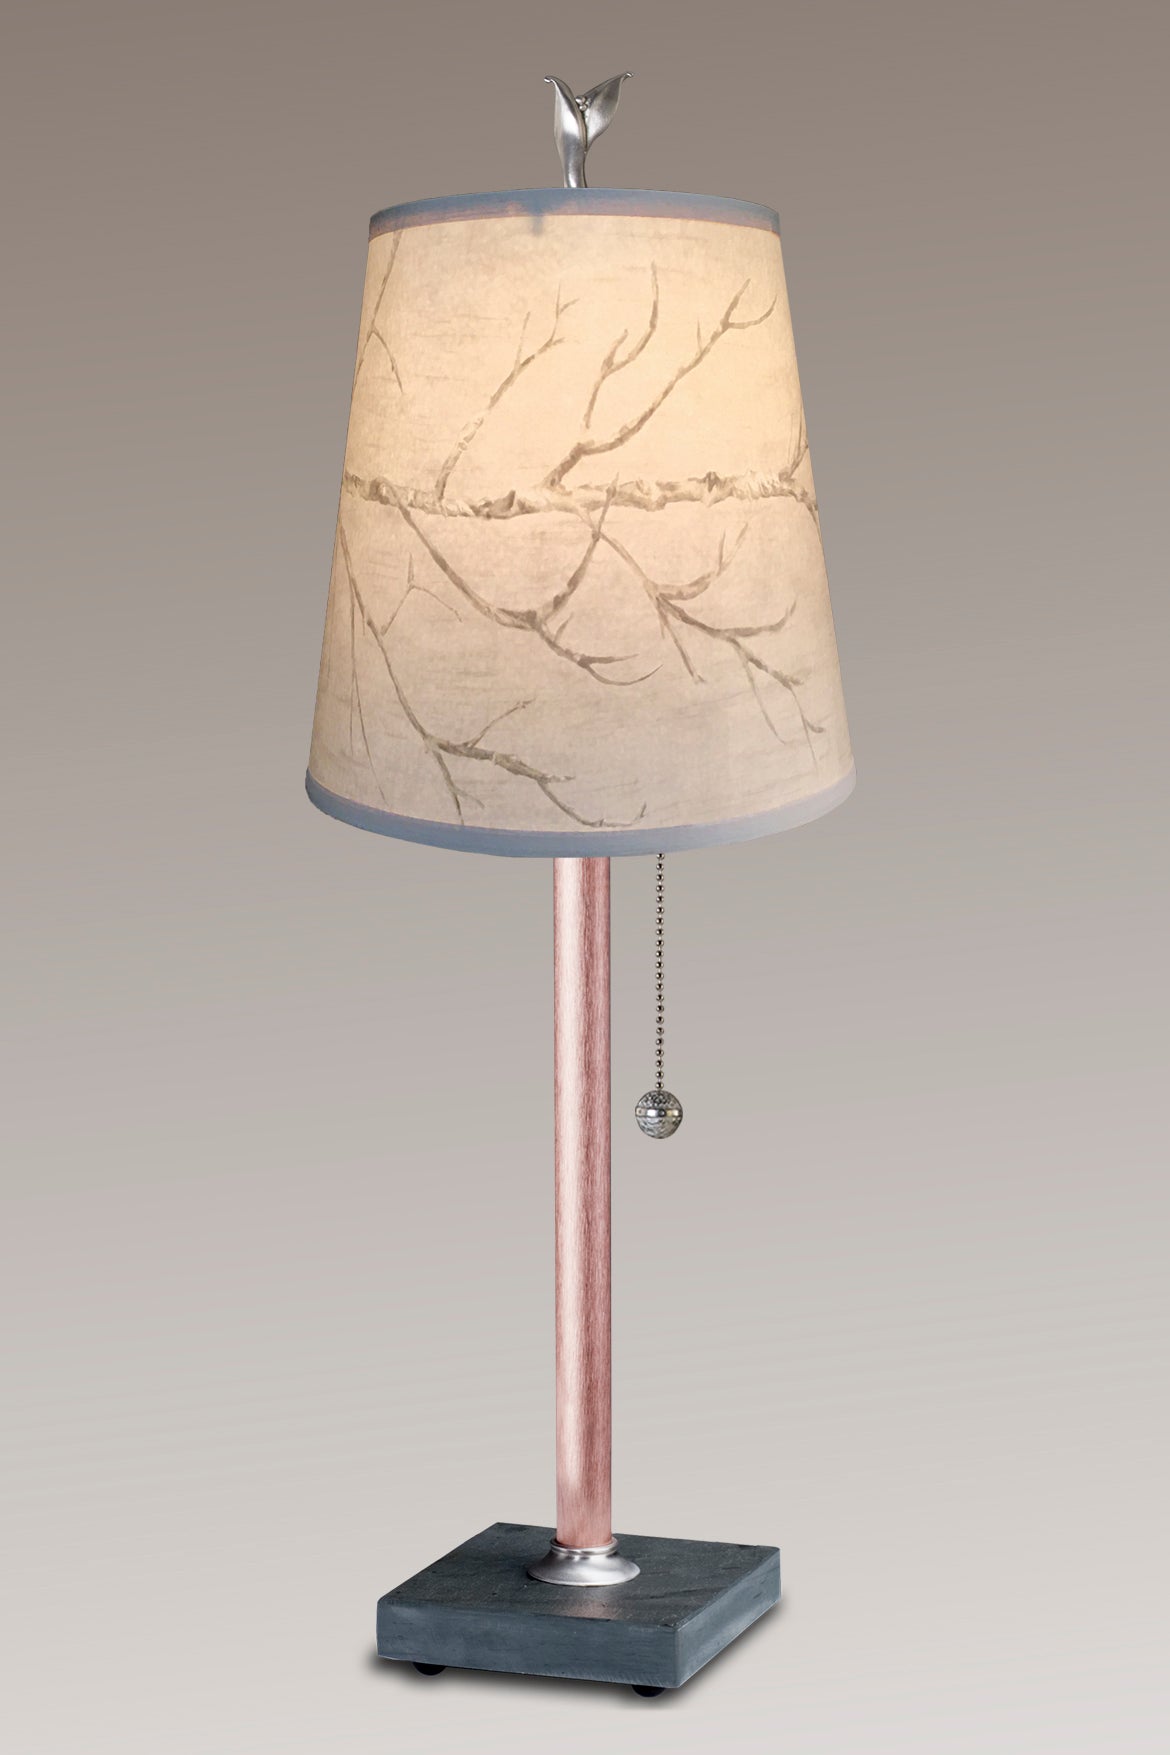 Janna Ugone & Co Table Lamps Copper Table Lamp with Small Drum Shade in Sweeping Branch